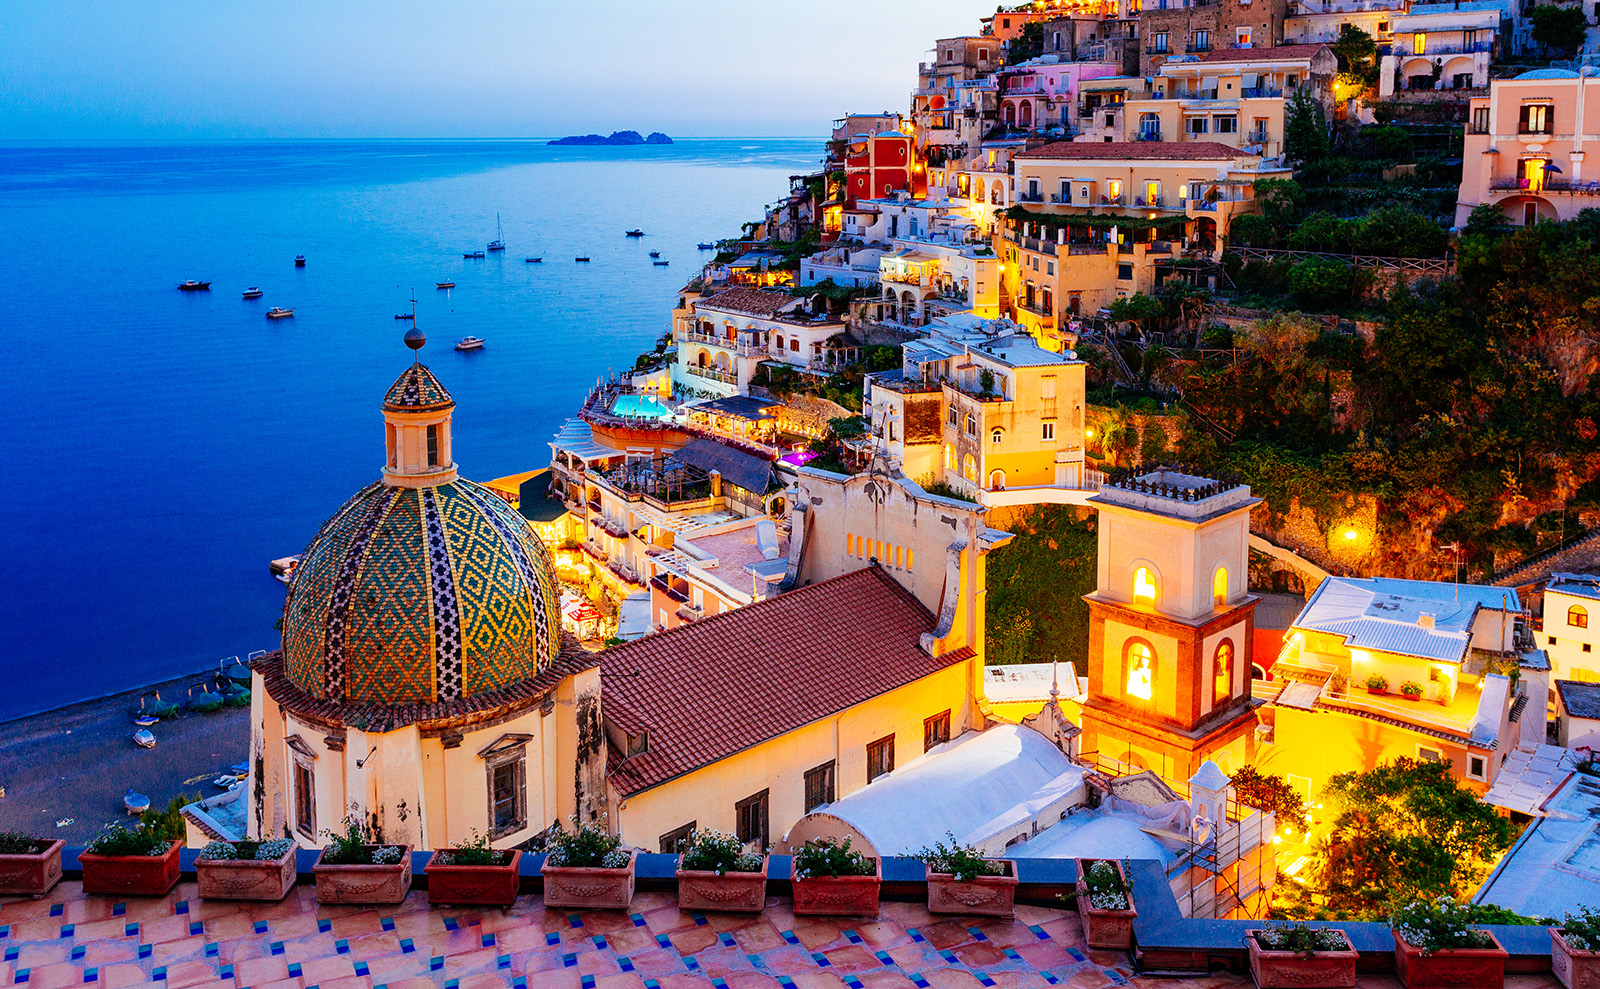 pastel-colored buildings on the amalfi coast of italy overlooking the ocean